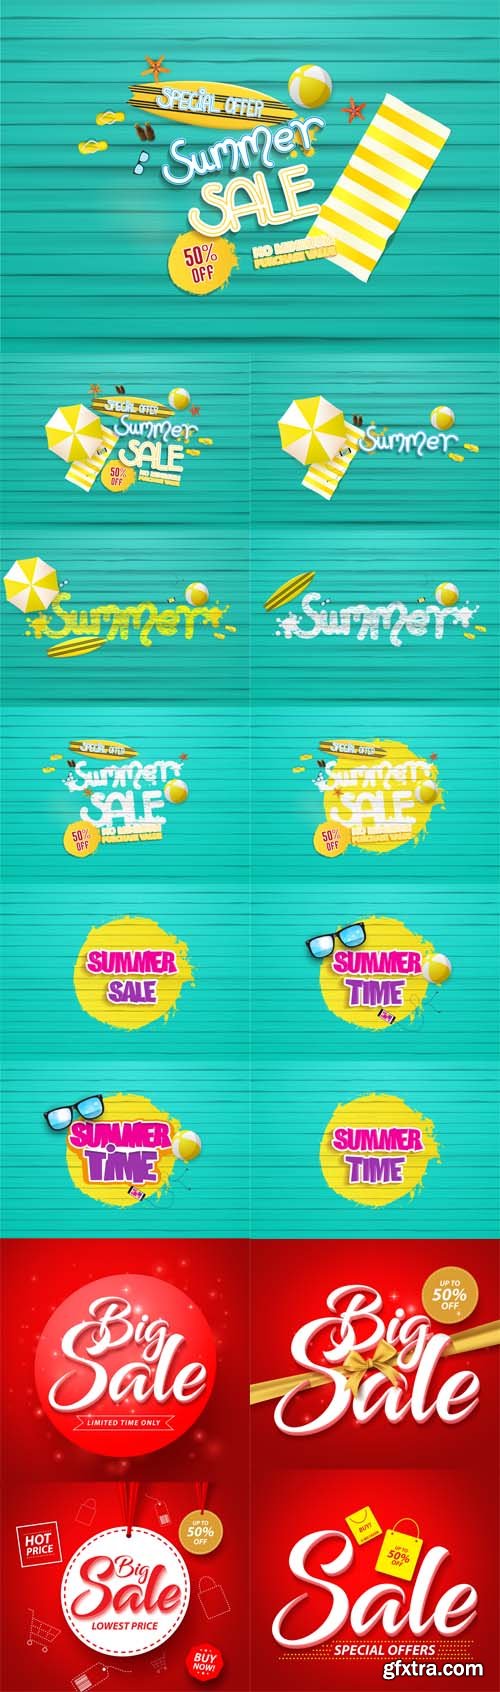 Vector Set - Summer Sale Background with Painted Wooden Floor and Beach Products